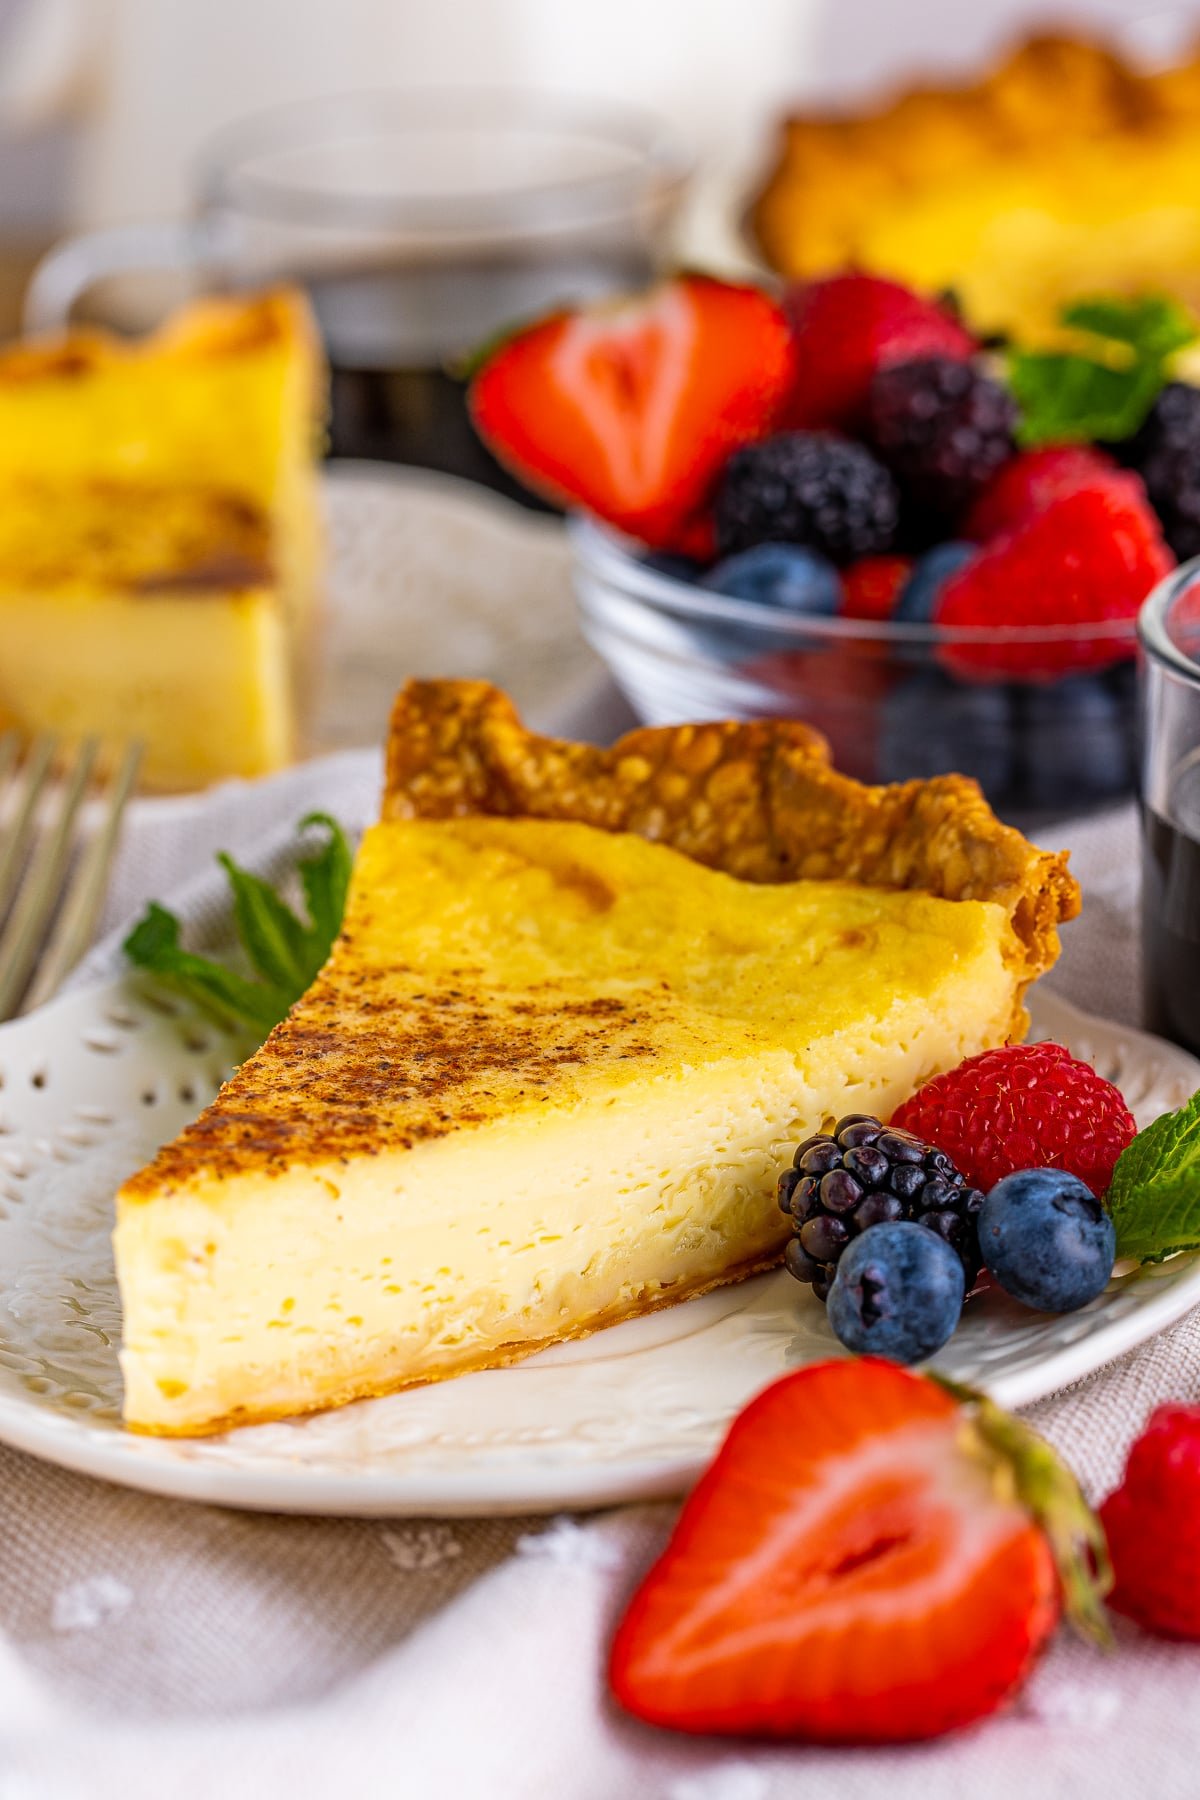 Slice of Custard Pie on white plate with fruit.